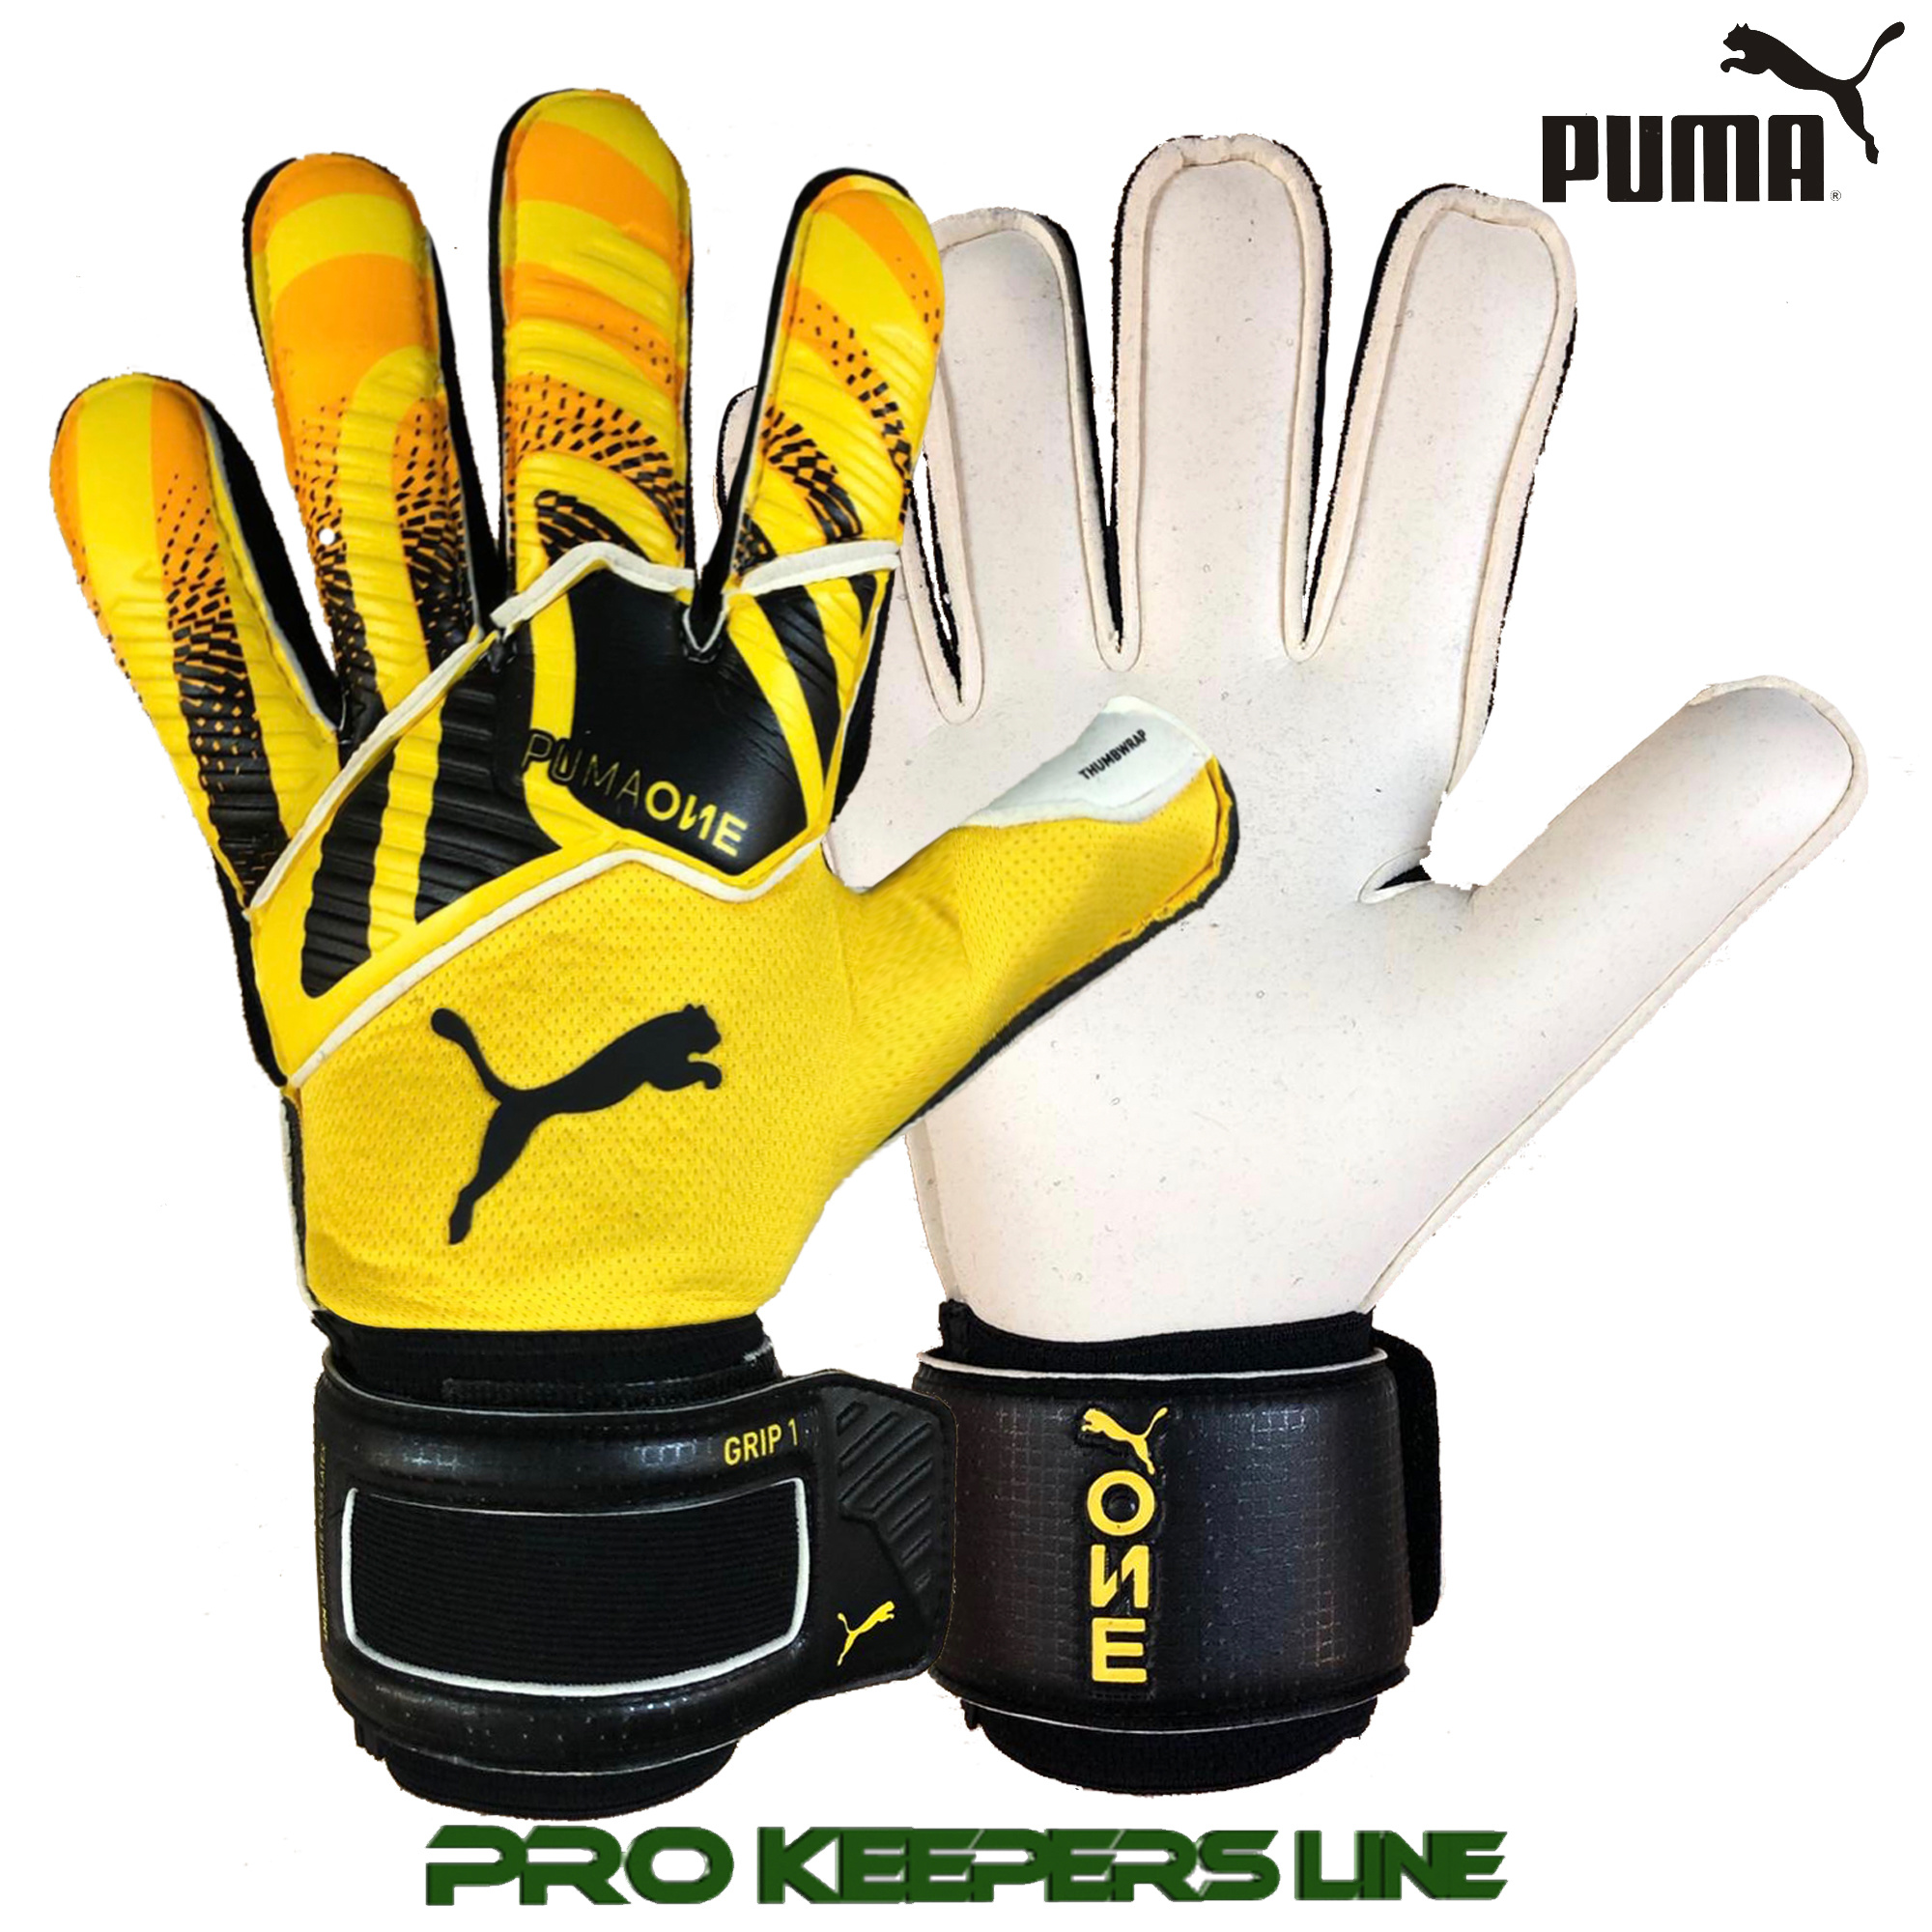 PUMA ONE GRIP 1 RC ULTRA YELLOW/BLACK - Pro Keepers Line